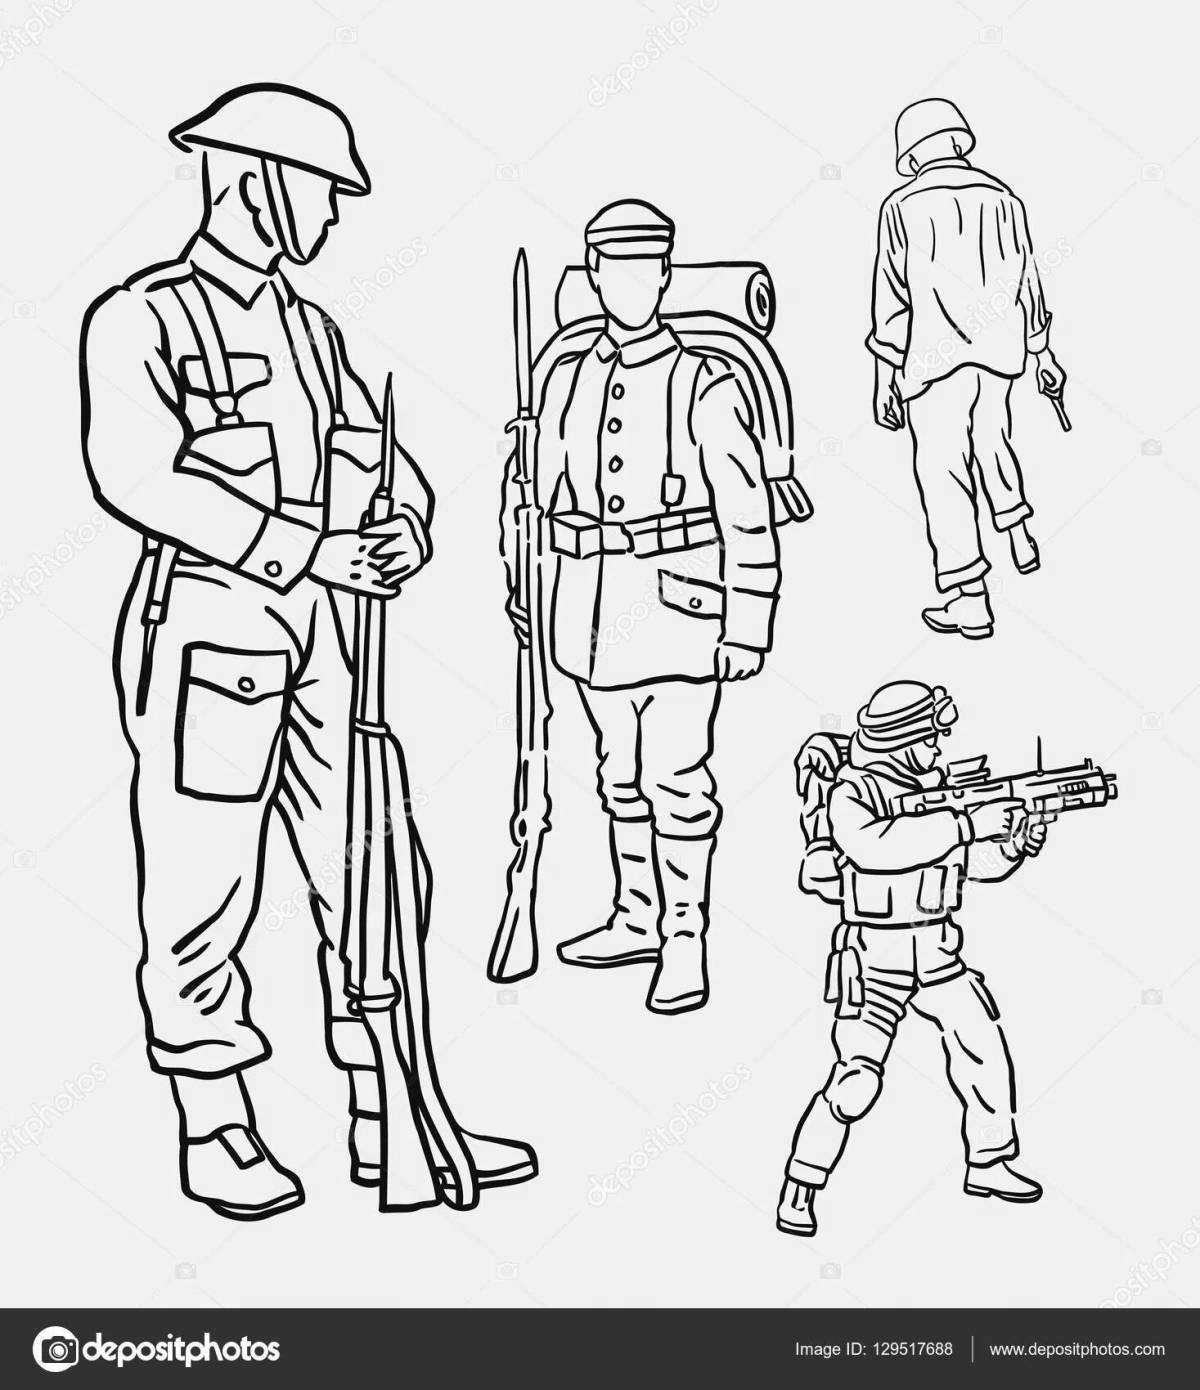 Gorgeous Russian soldier coloring pages for kids